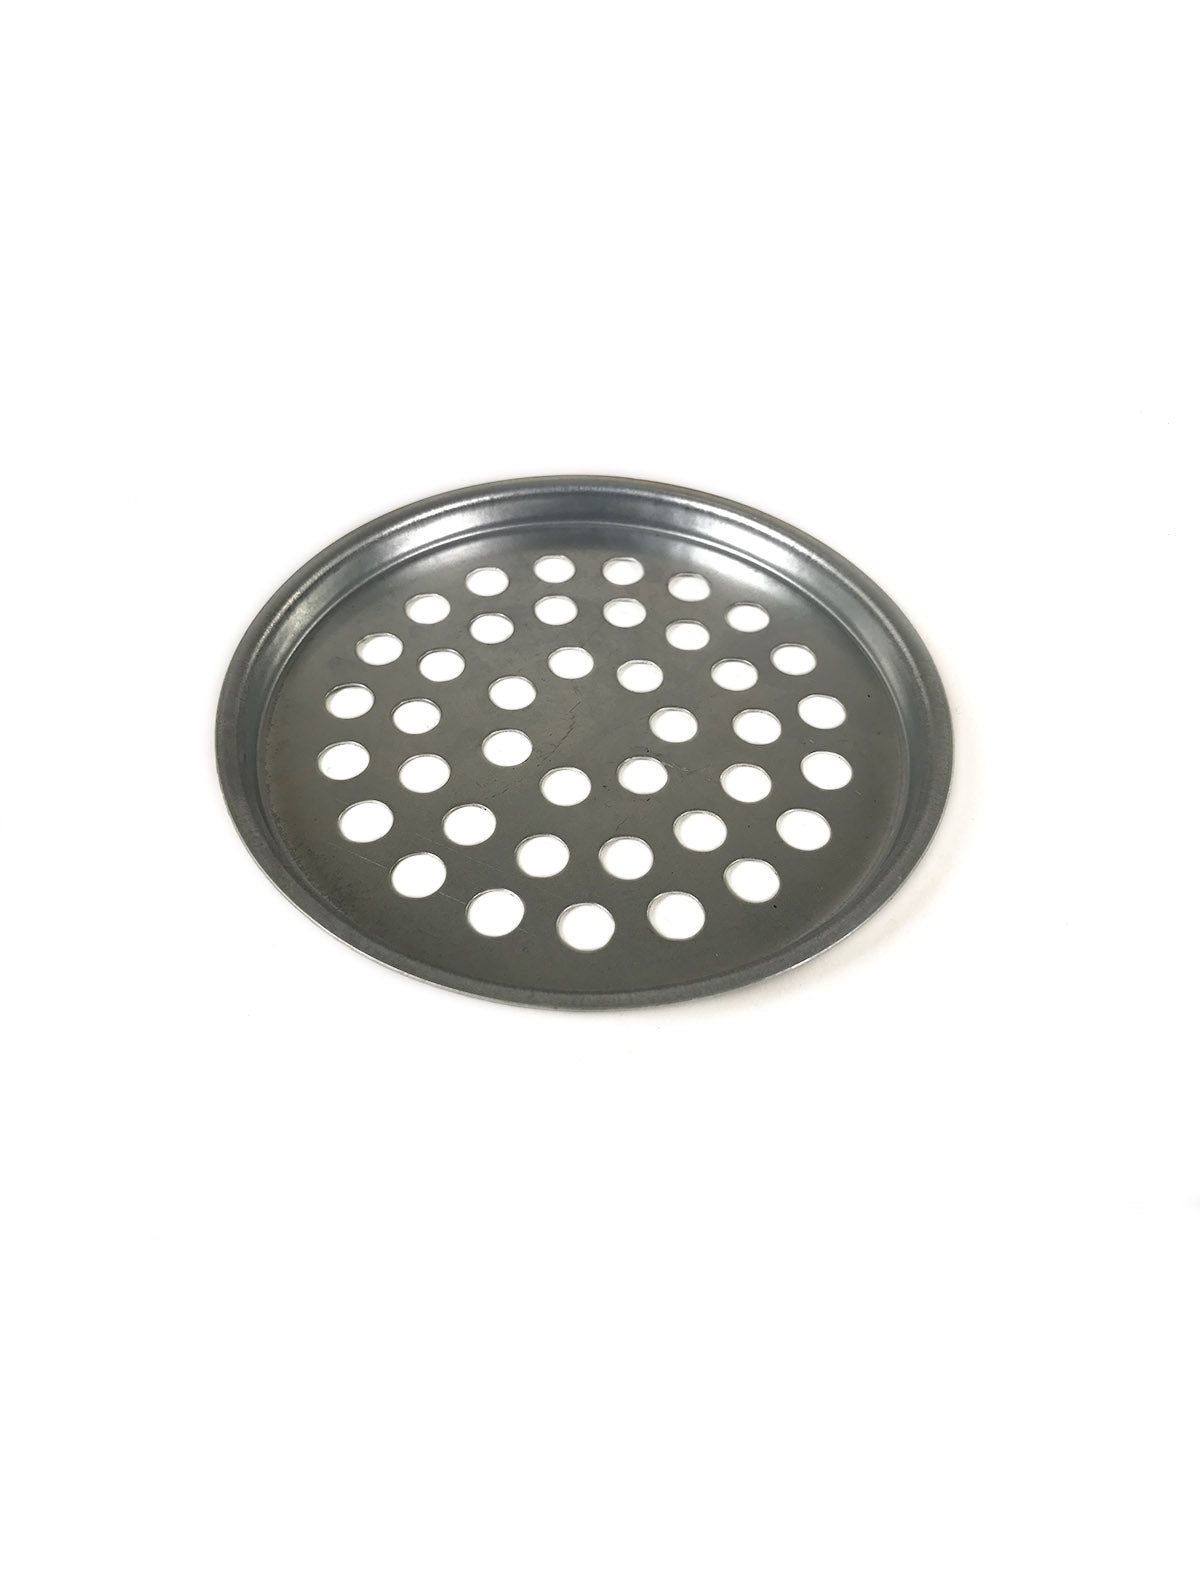 Gas Cooker Charcoal Screen - Light Up Charcoal More Safely